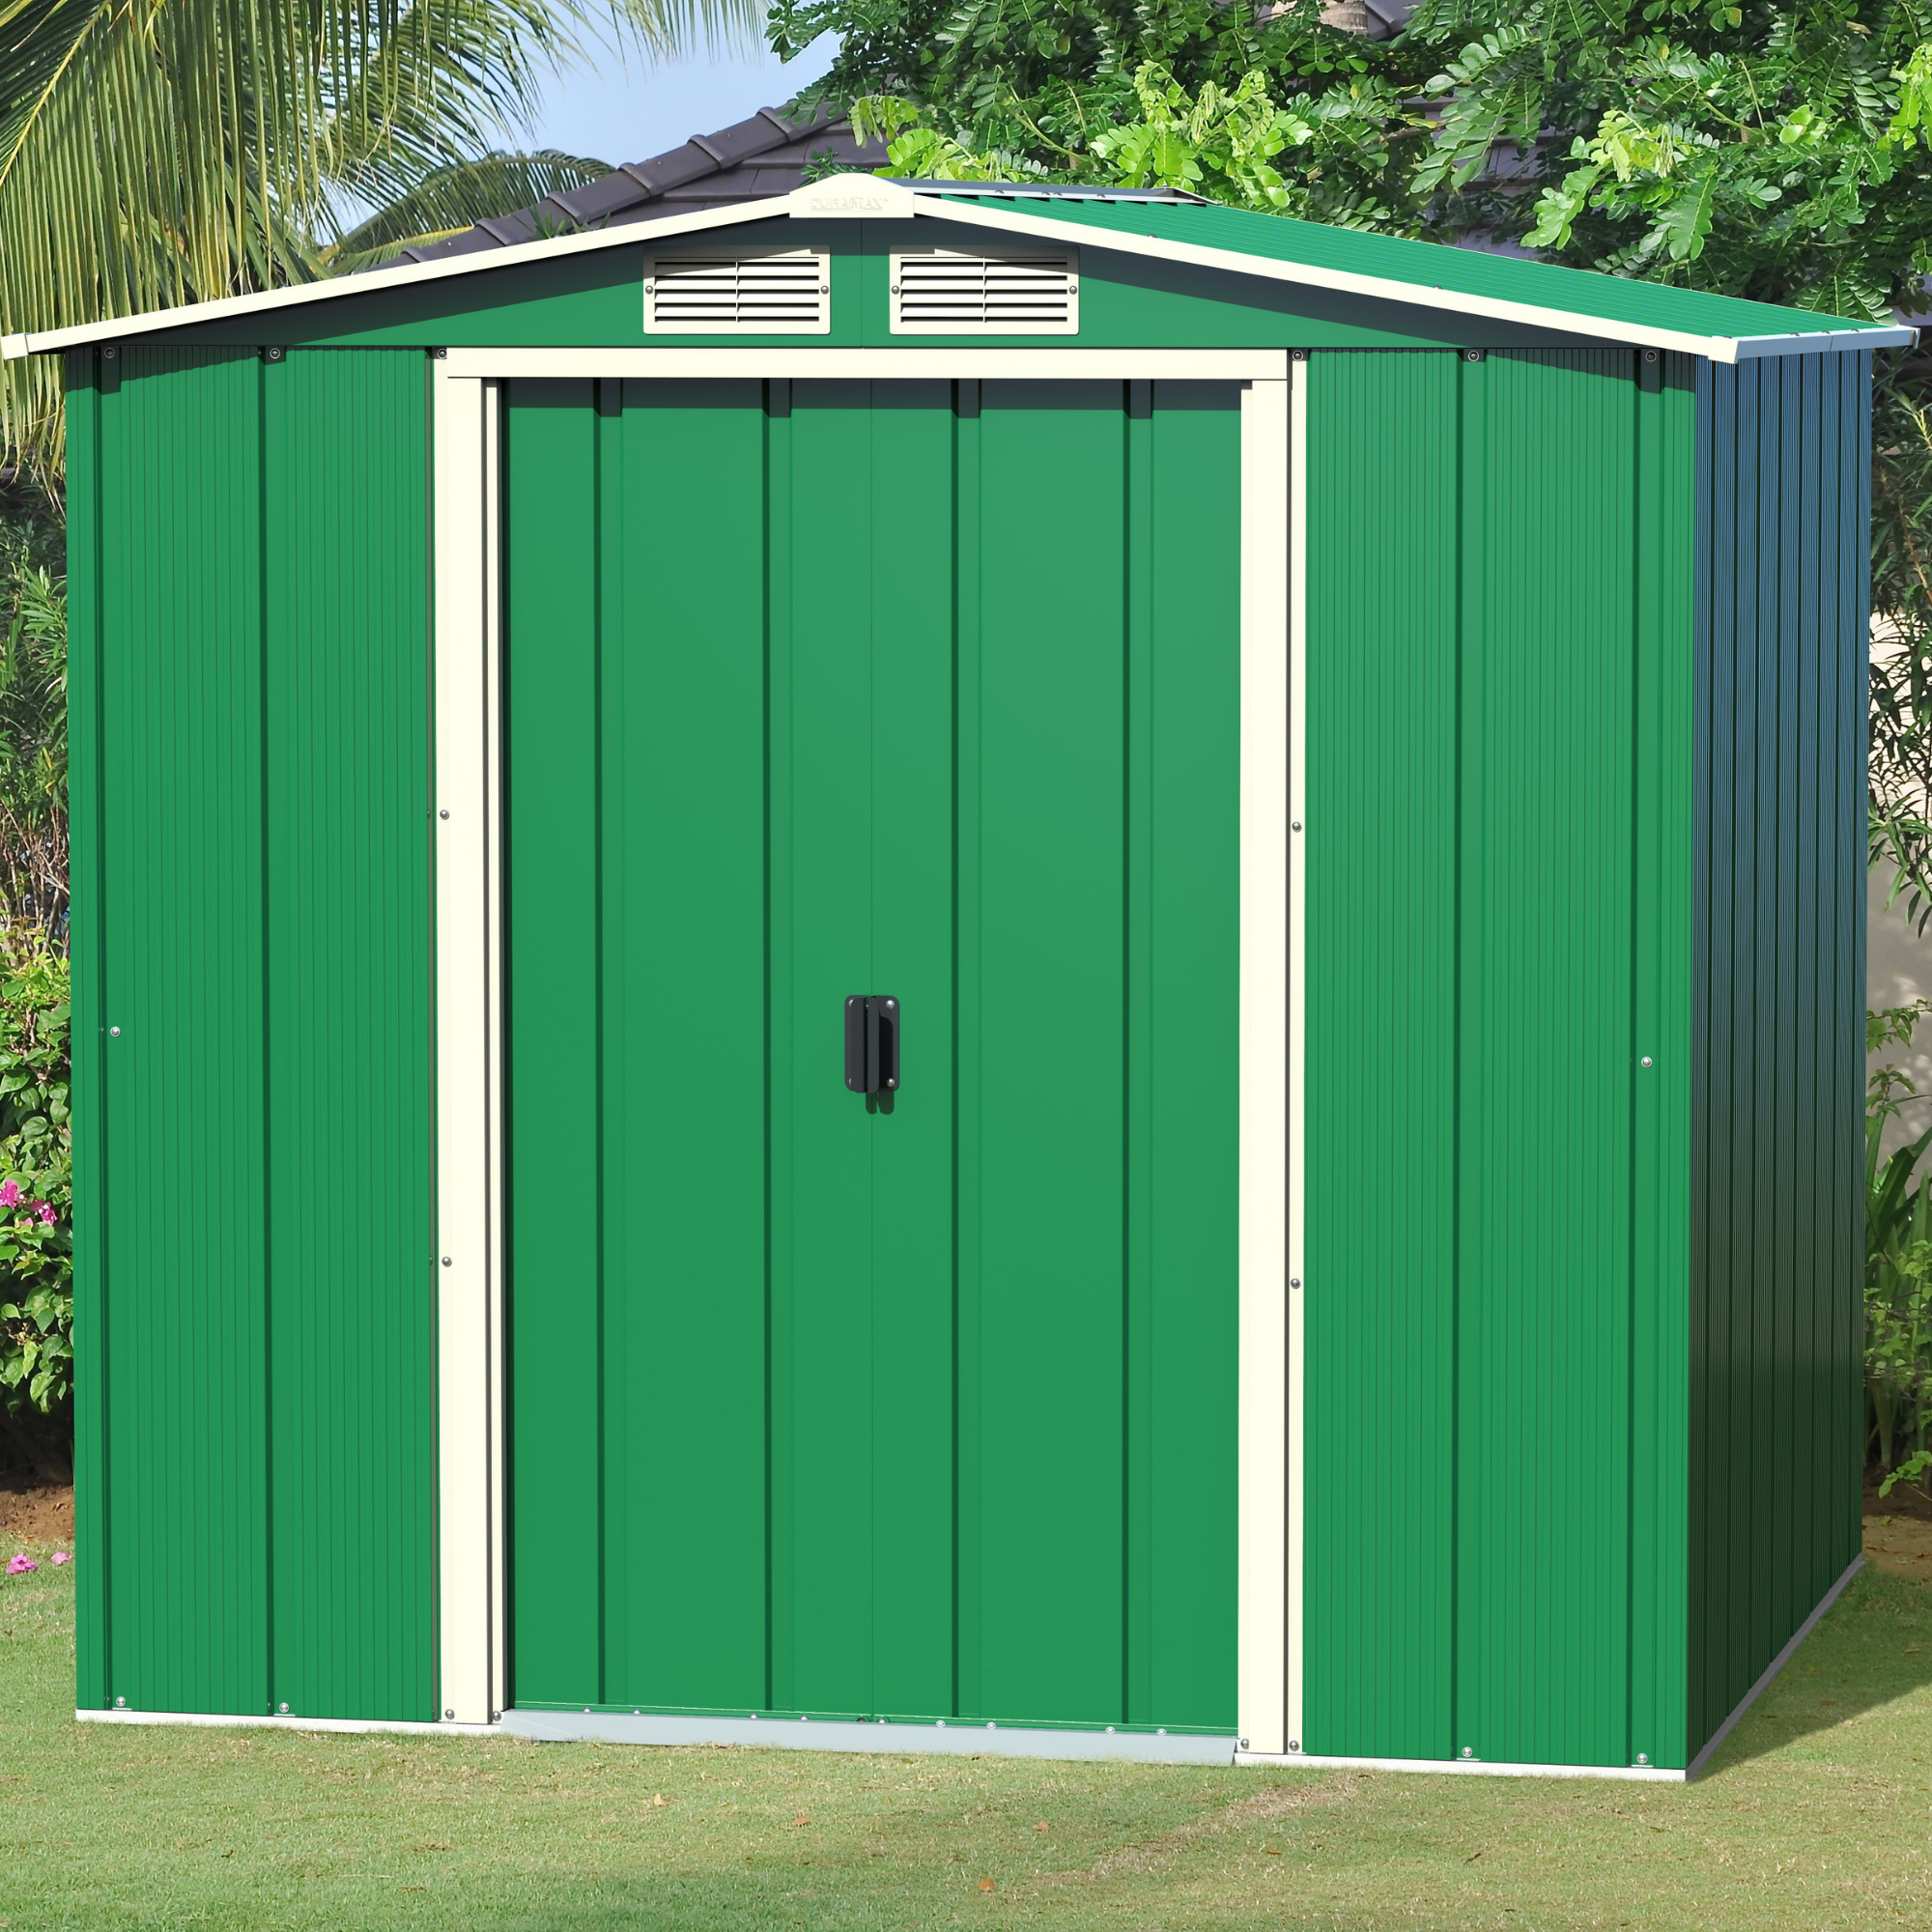 BillyOh Partner Eco Apex Roof Metal Shed - 6x6 Apex Eco